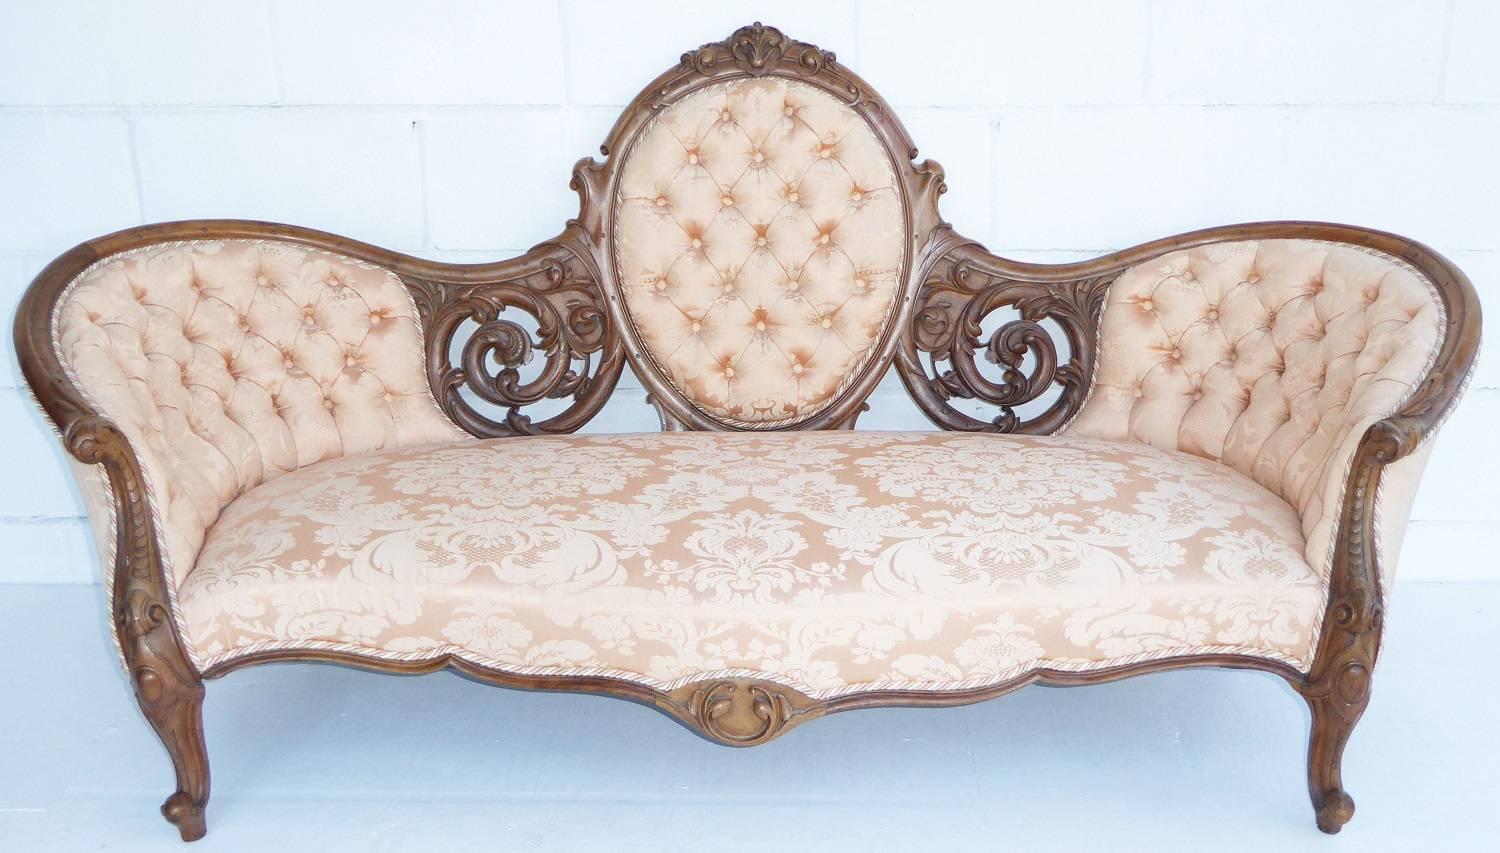 For sale is a fine quality Victorian walnut three-piece suite consisting of a sofa, a gentleman's armchair and a ladies armchair. The sofa has a cameo back, with ornate carvings either side, and all of the upholstery and fabric is in a nice, clean